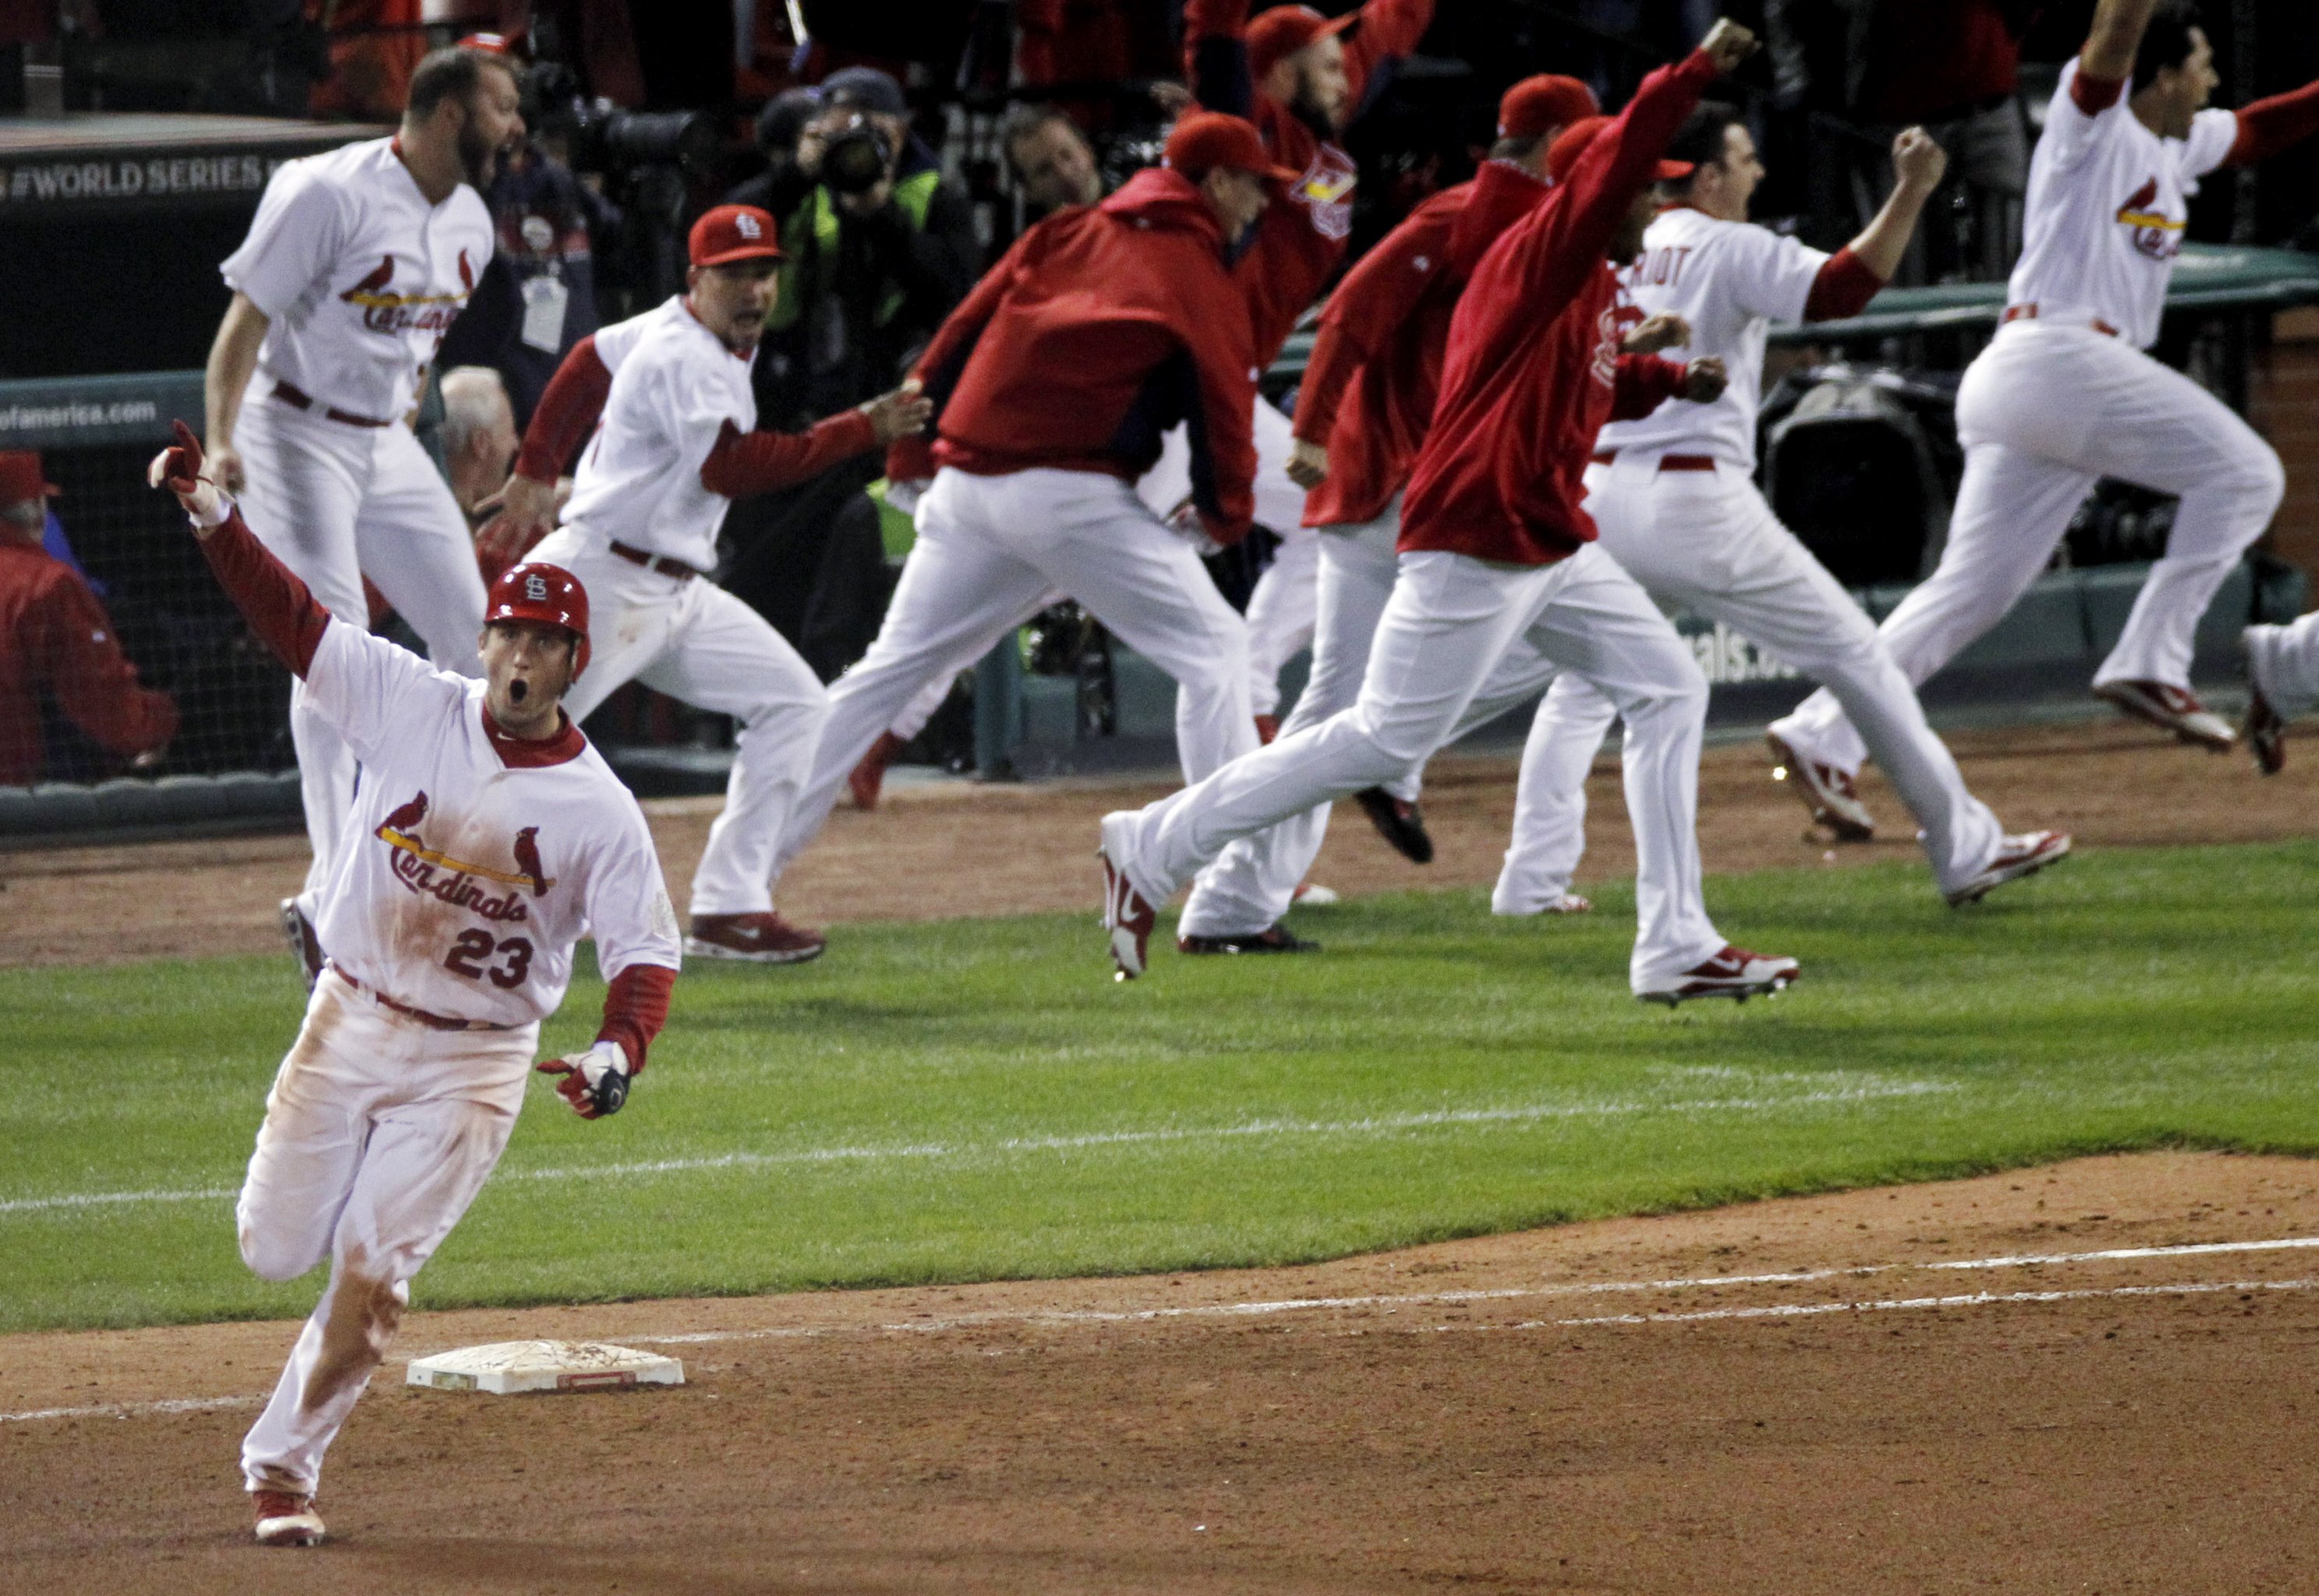 What Is the Most Iconic Postseason Moment for Every MLB Team